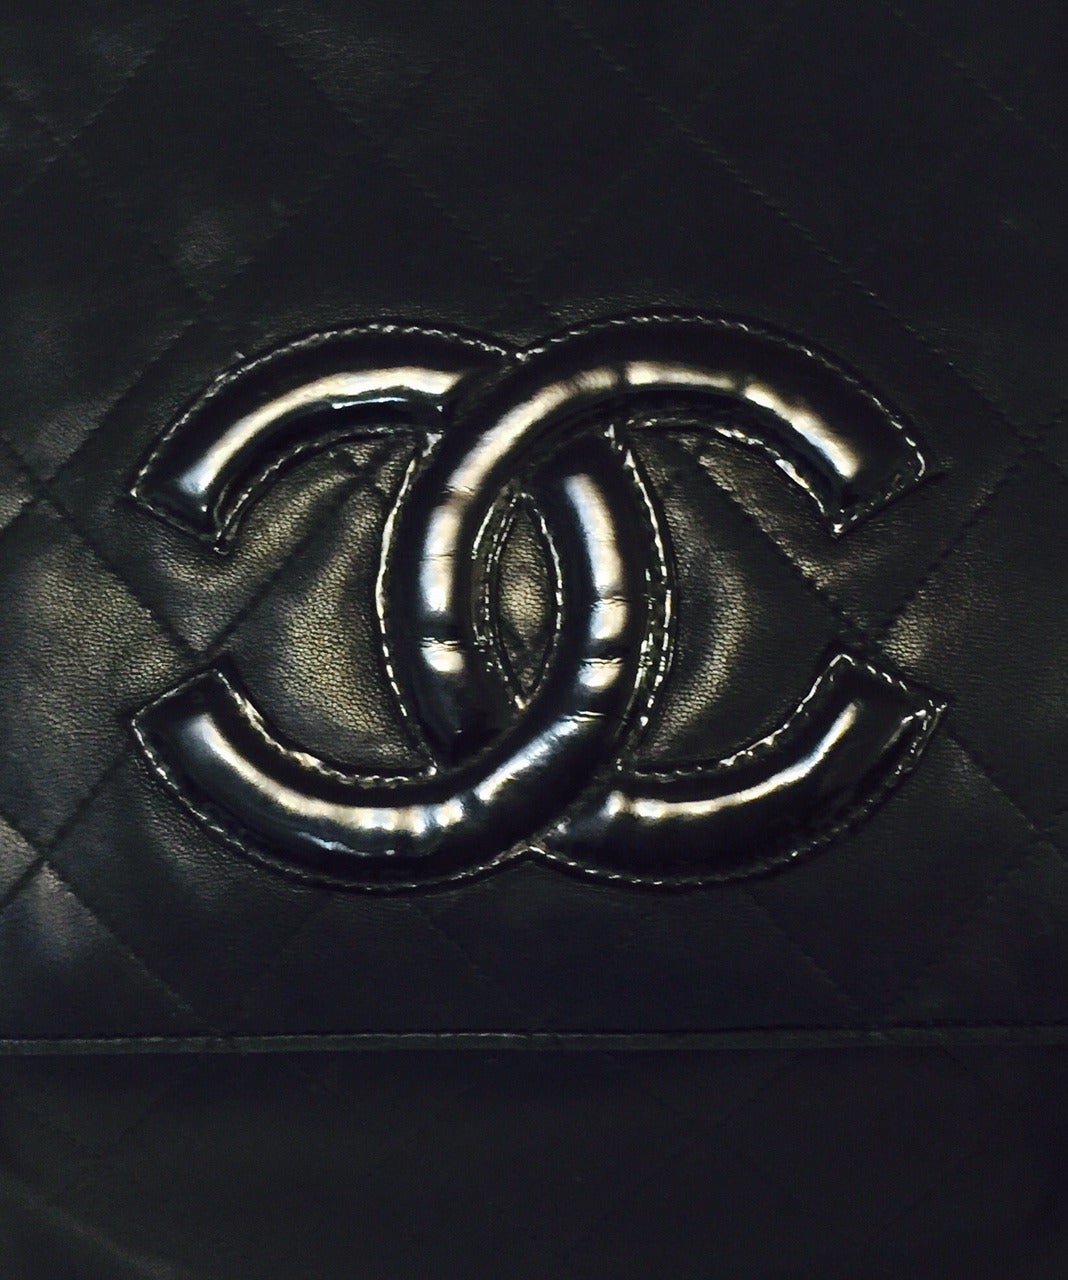 Women's 1990s Chanel Black Quilted Lambskin Shoulder Bag With Serpentine Strap For Sale